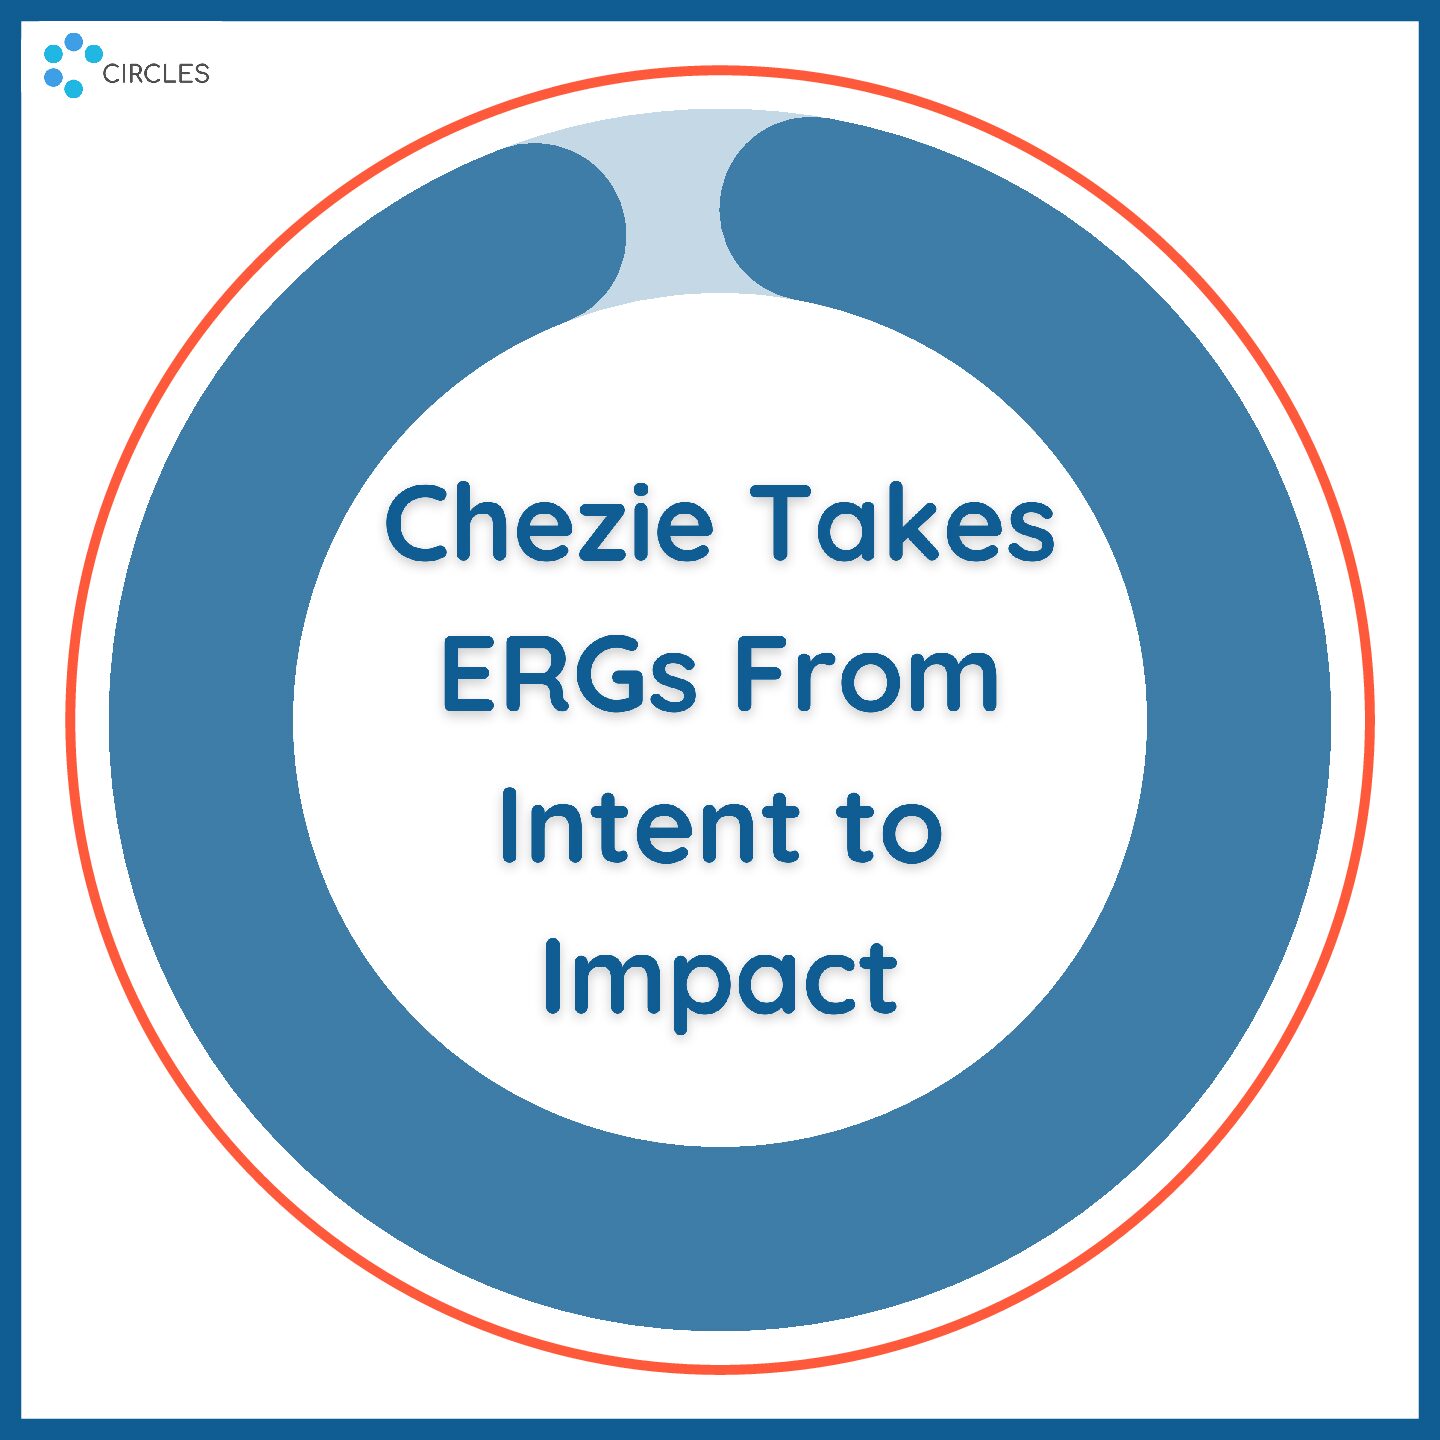 Chezie Takes ERGs From Intent to Impact